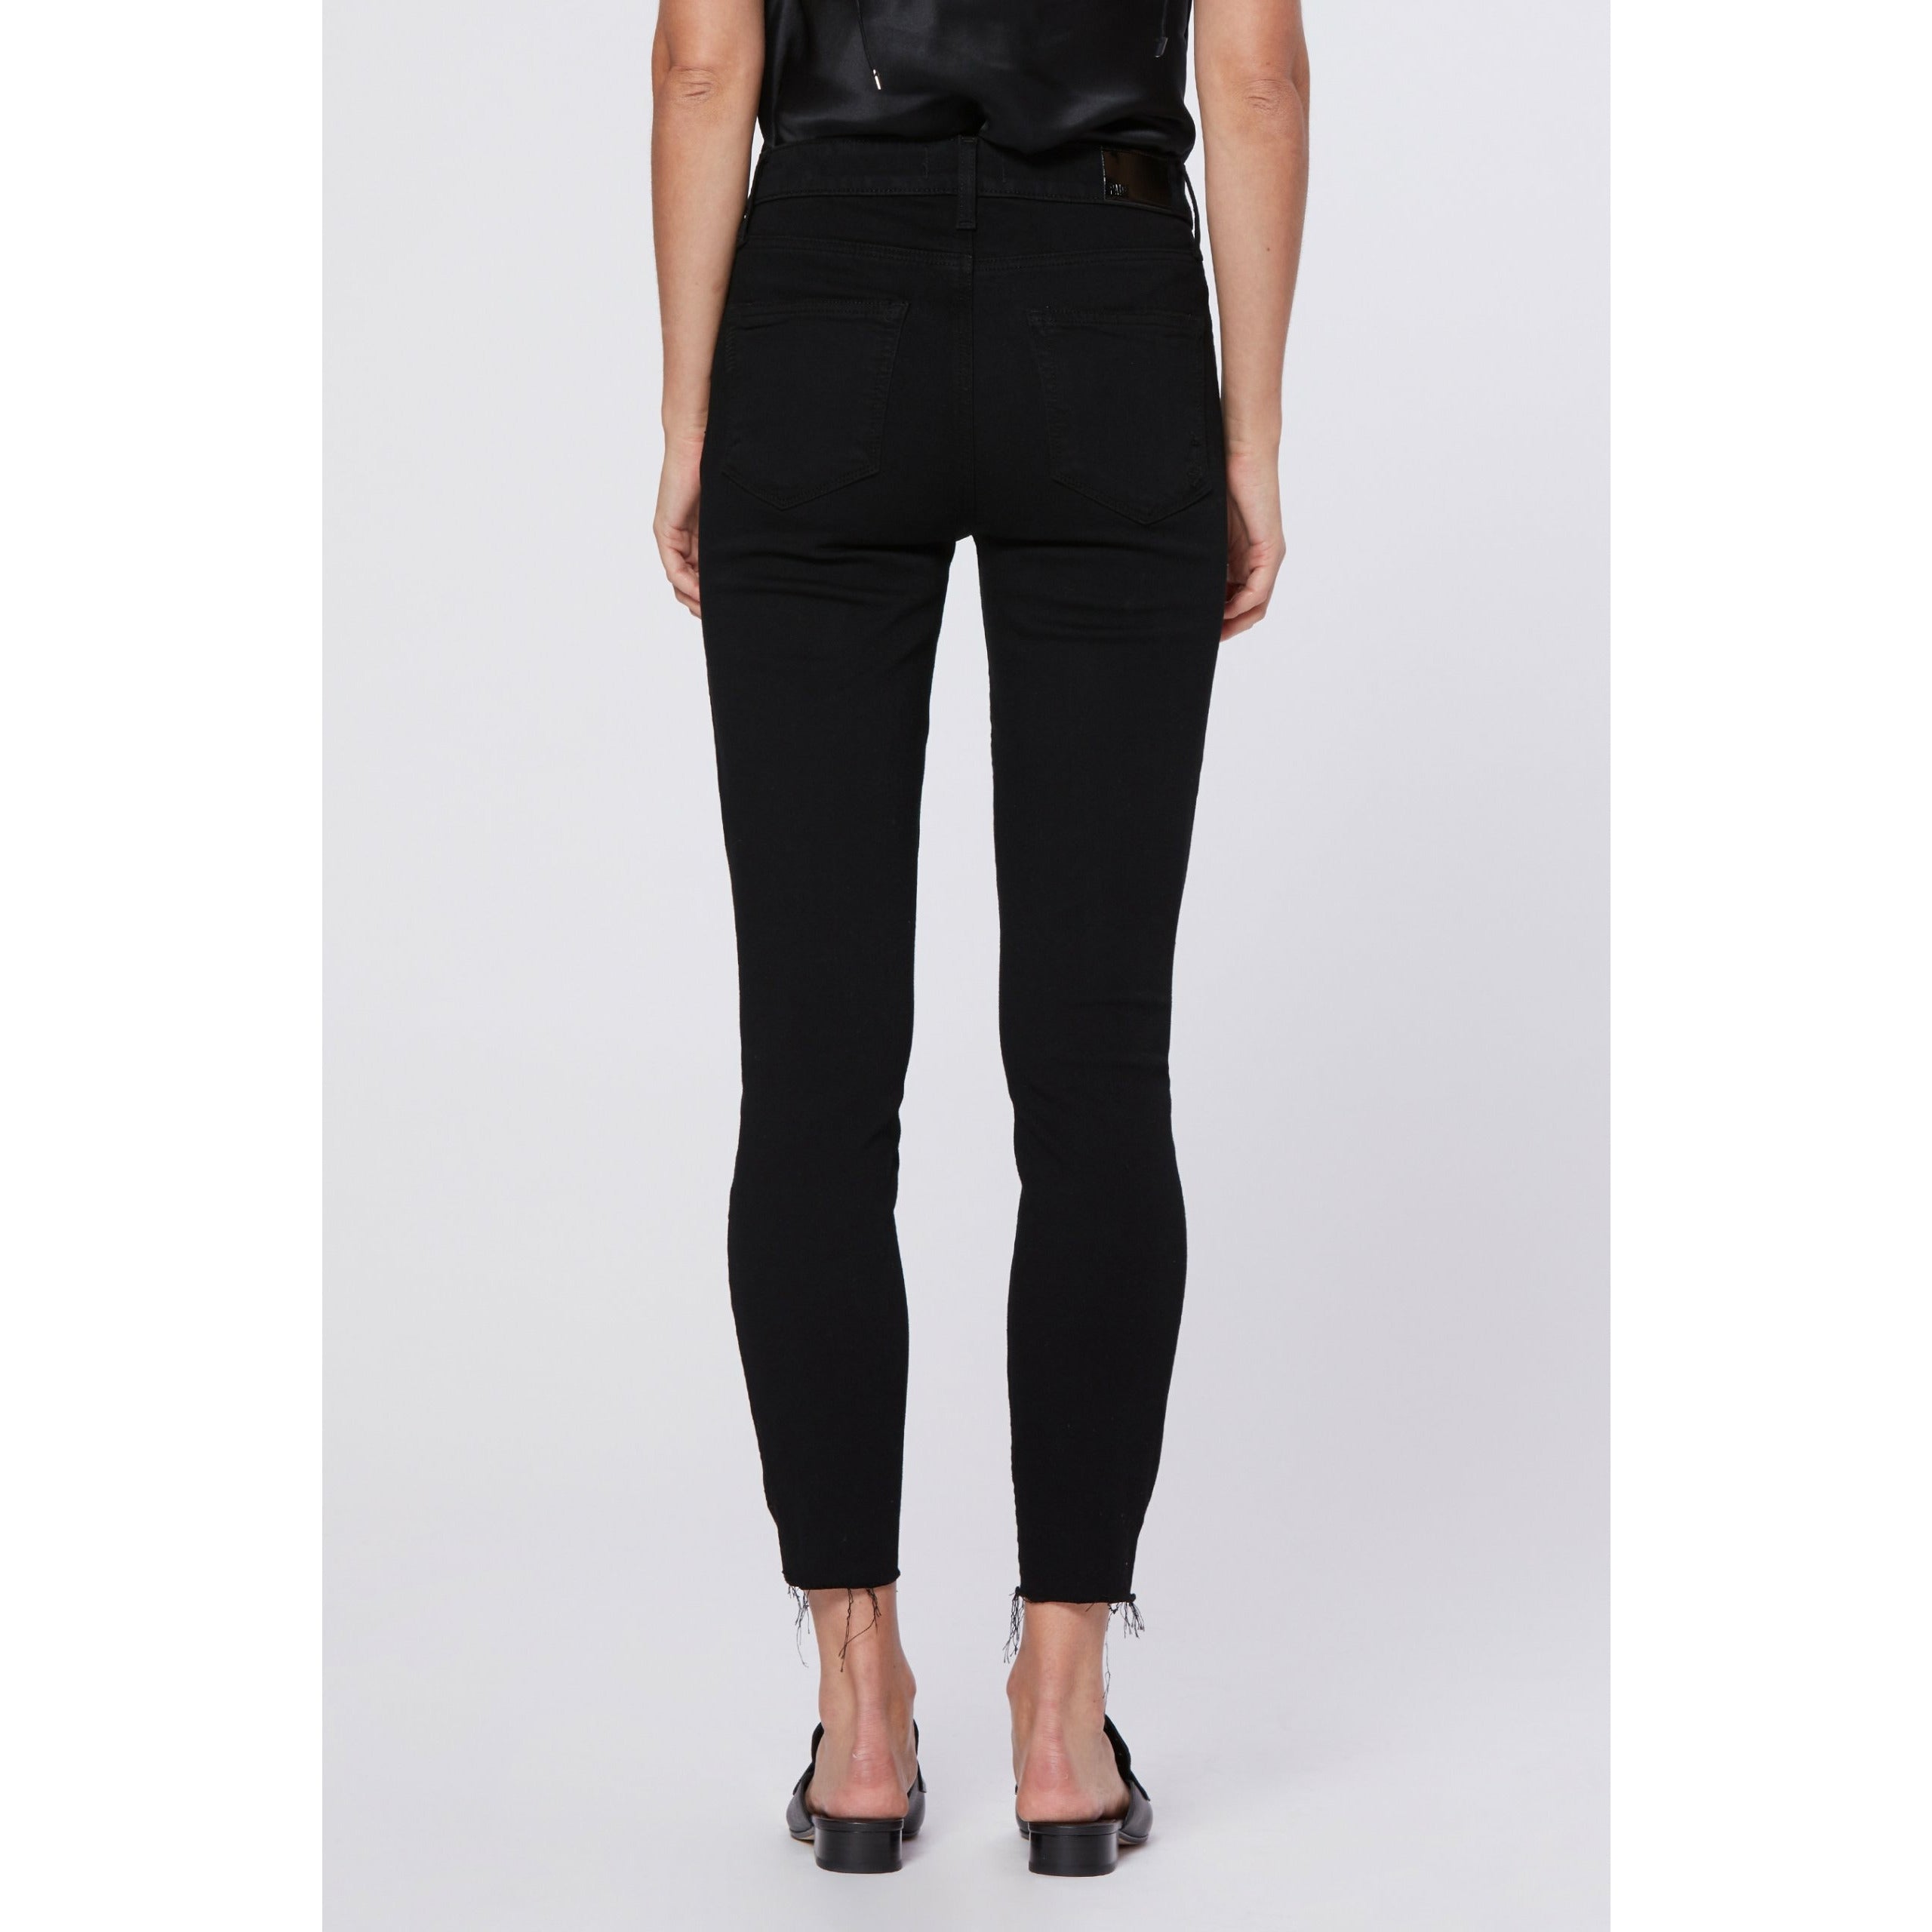 Hoxton Ankle with Outseam Slim + Raw Hem 8534